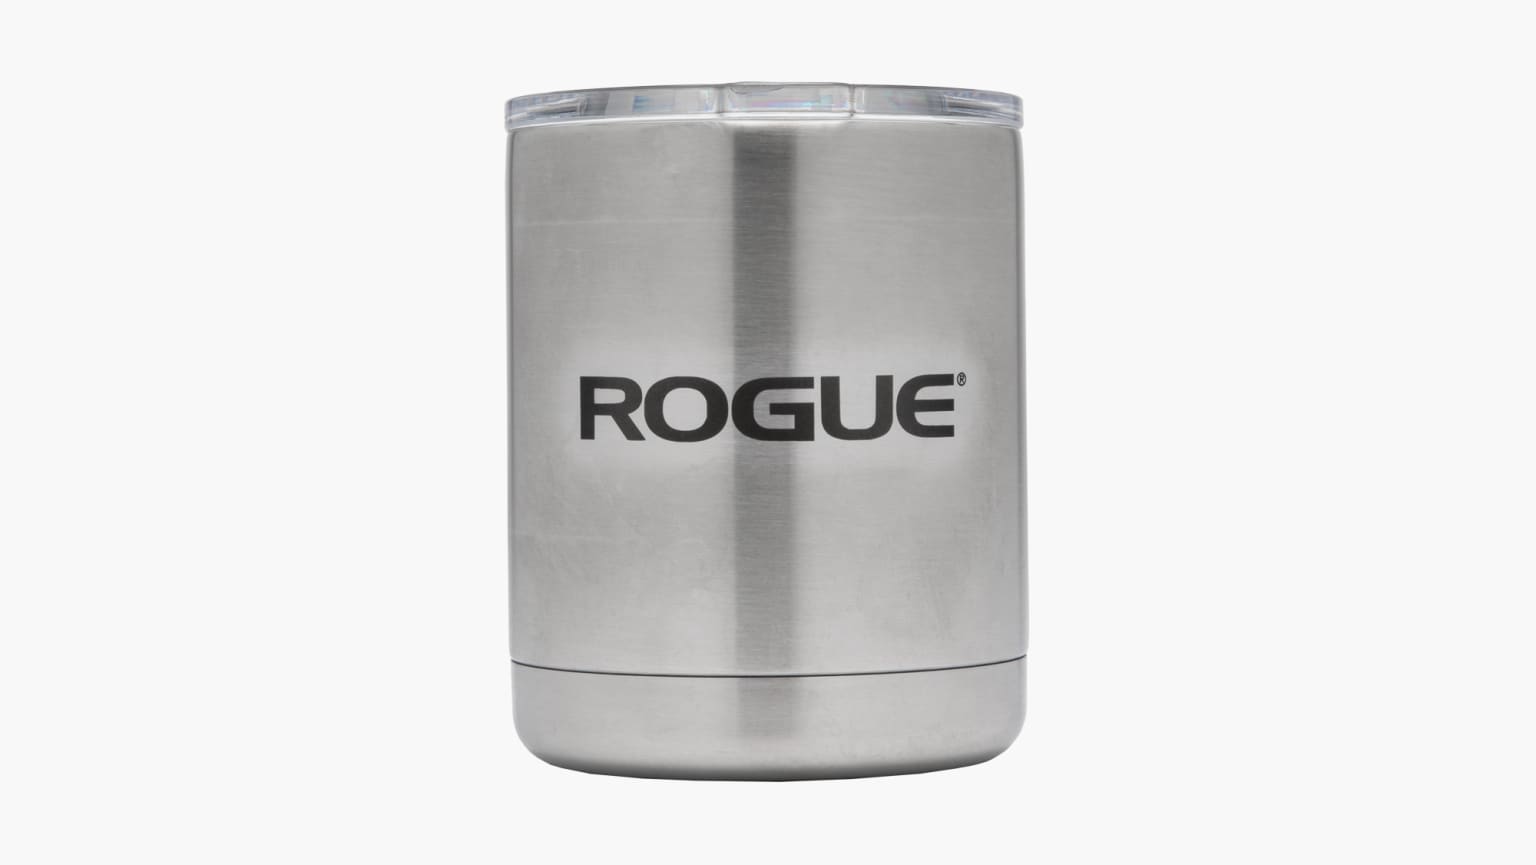 https://assets.roguefitness.com/f_auto,q_auto,c_limit,w_1536,b_rgb:f8f8f8/catalog/Gear%20and%20Accessories/Accessories/Shakers%20and%20Bottles/YT0075/YT0075-H_olygiv.png